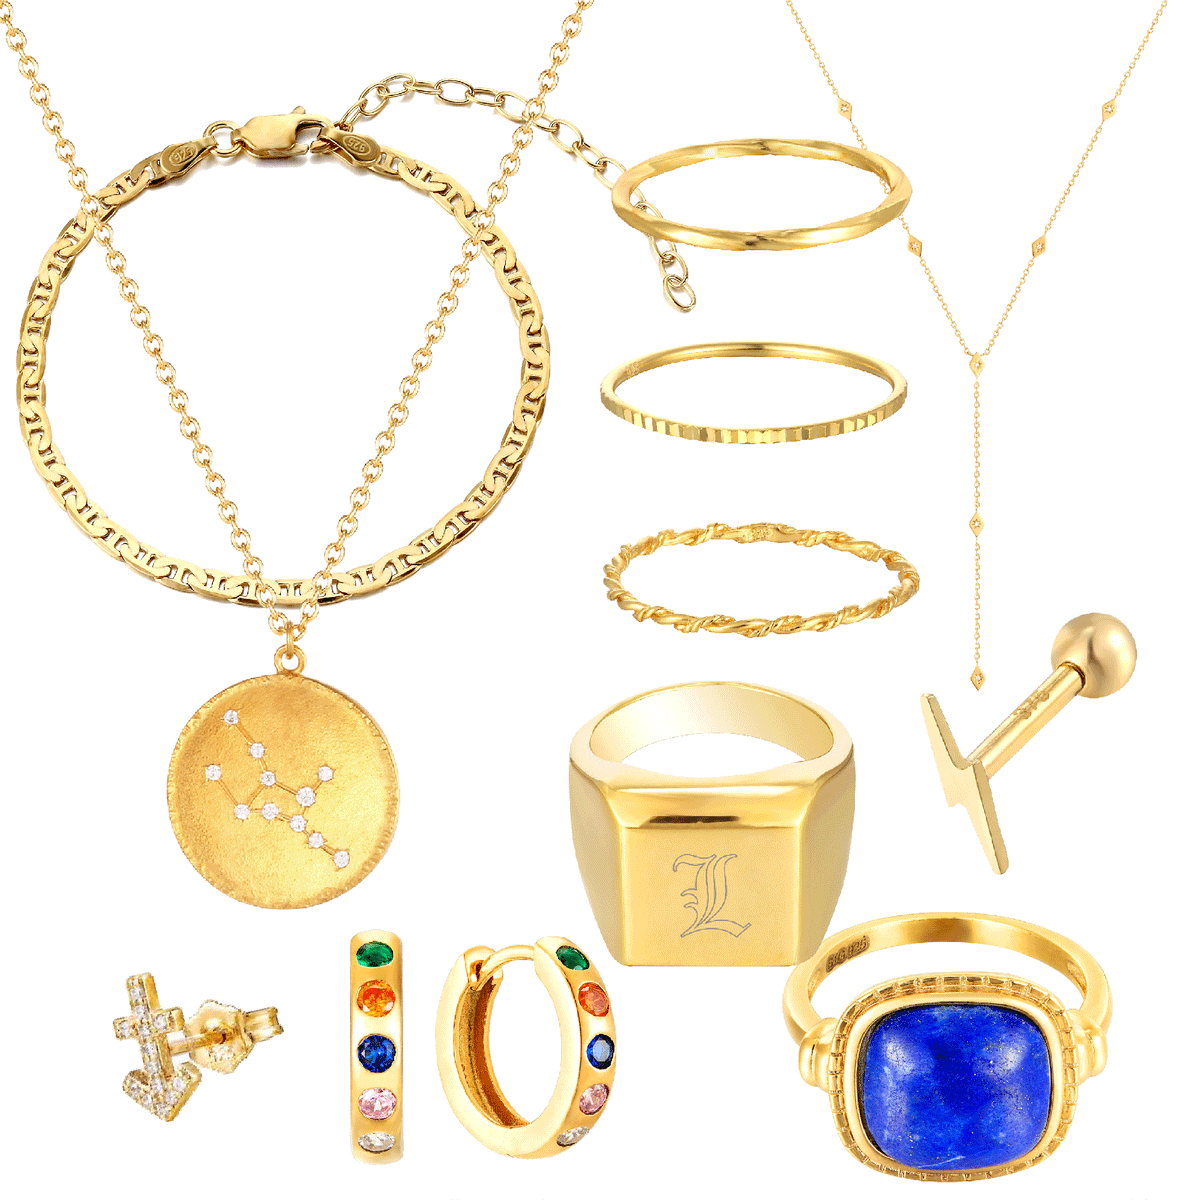 Jewellery Under £50 We're Lusting Over